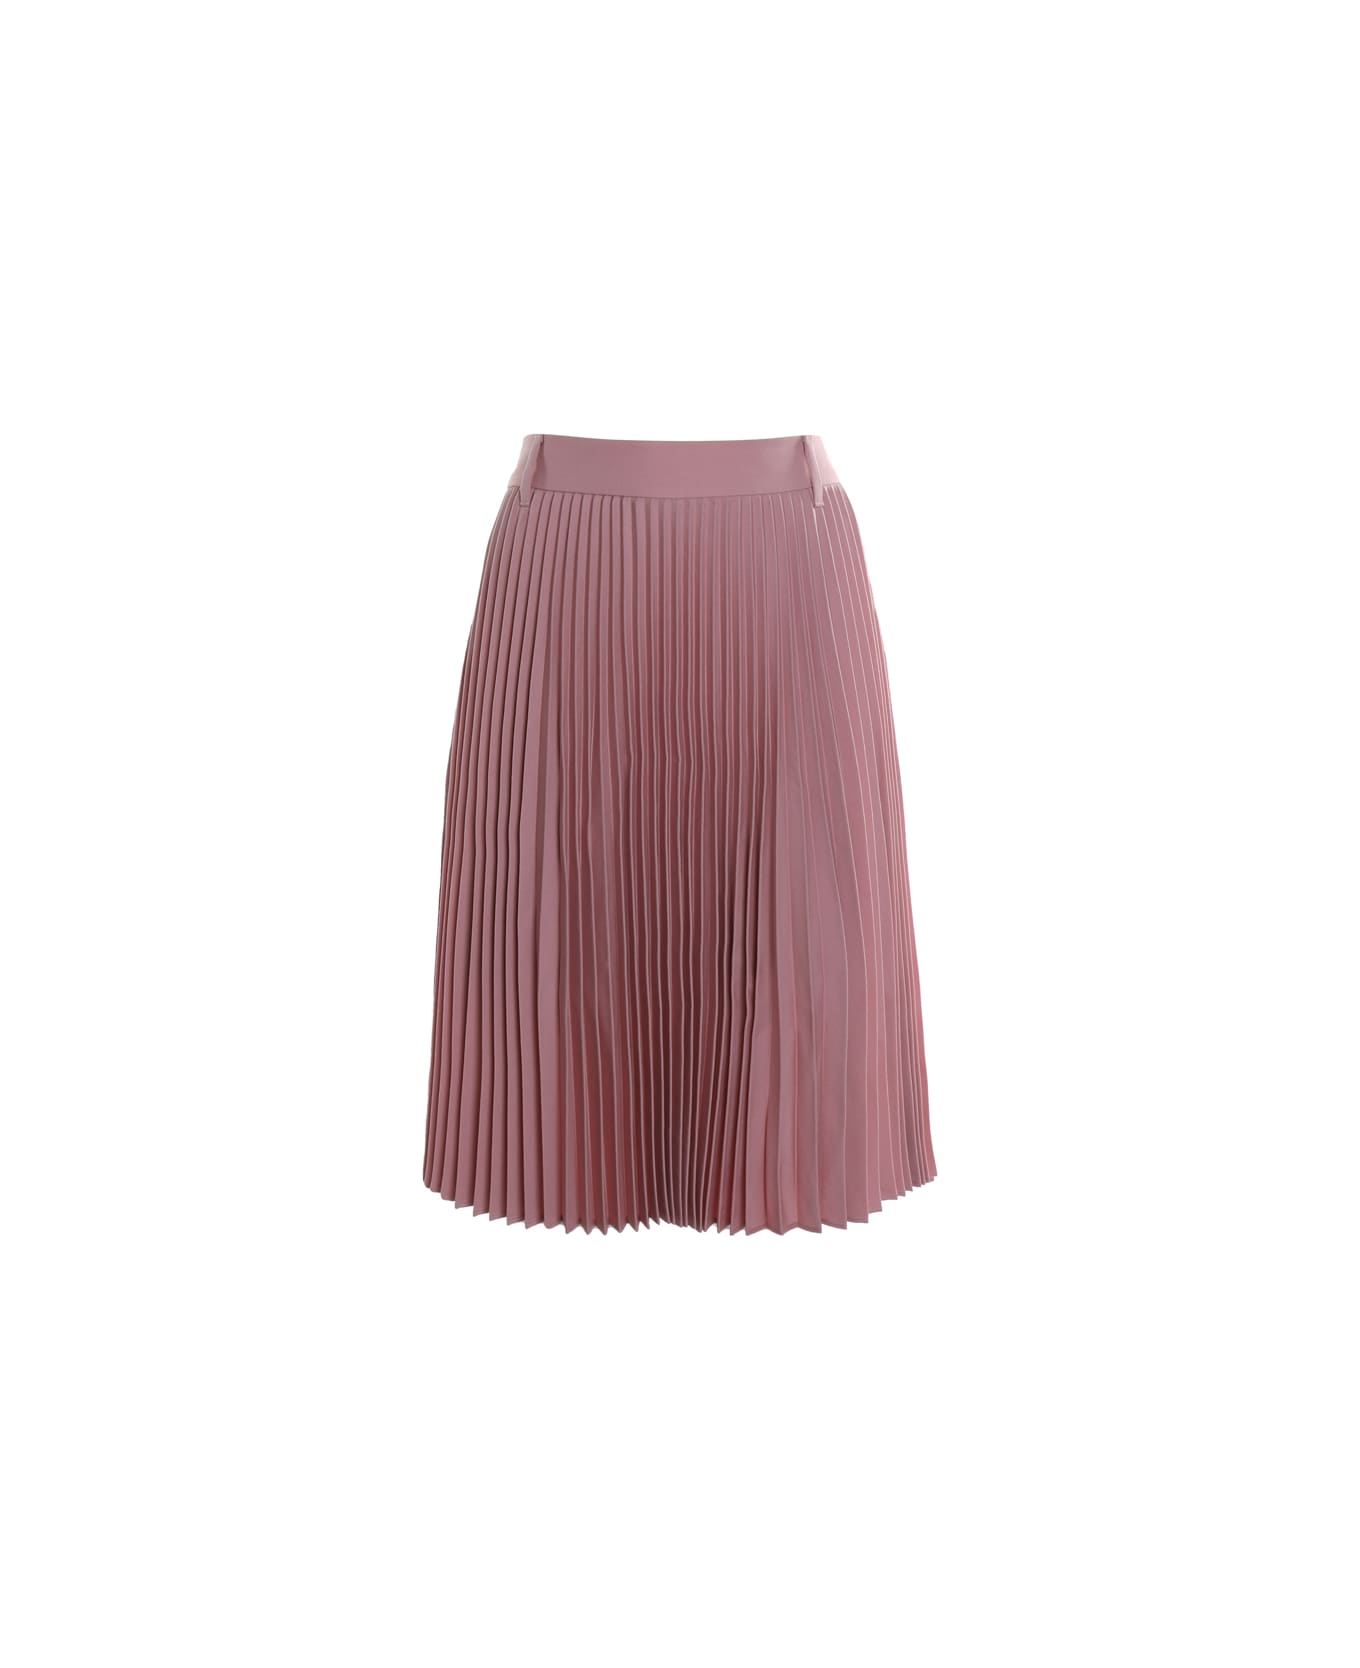 Burberry Skirt With Shorts With Pleated Detail - Rosy pink